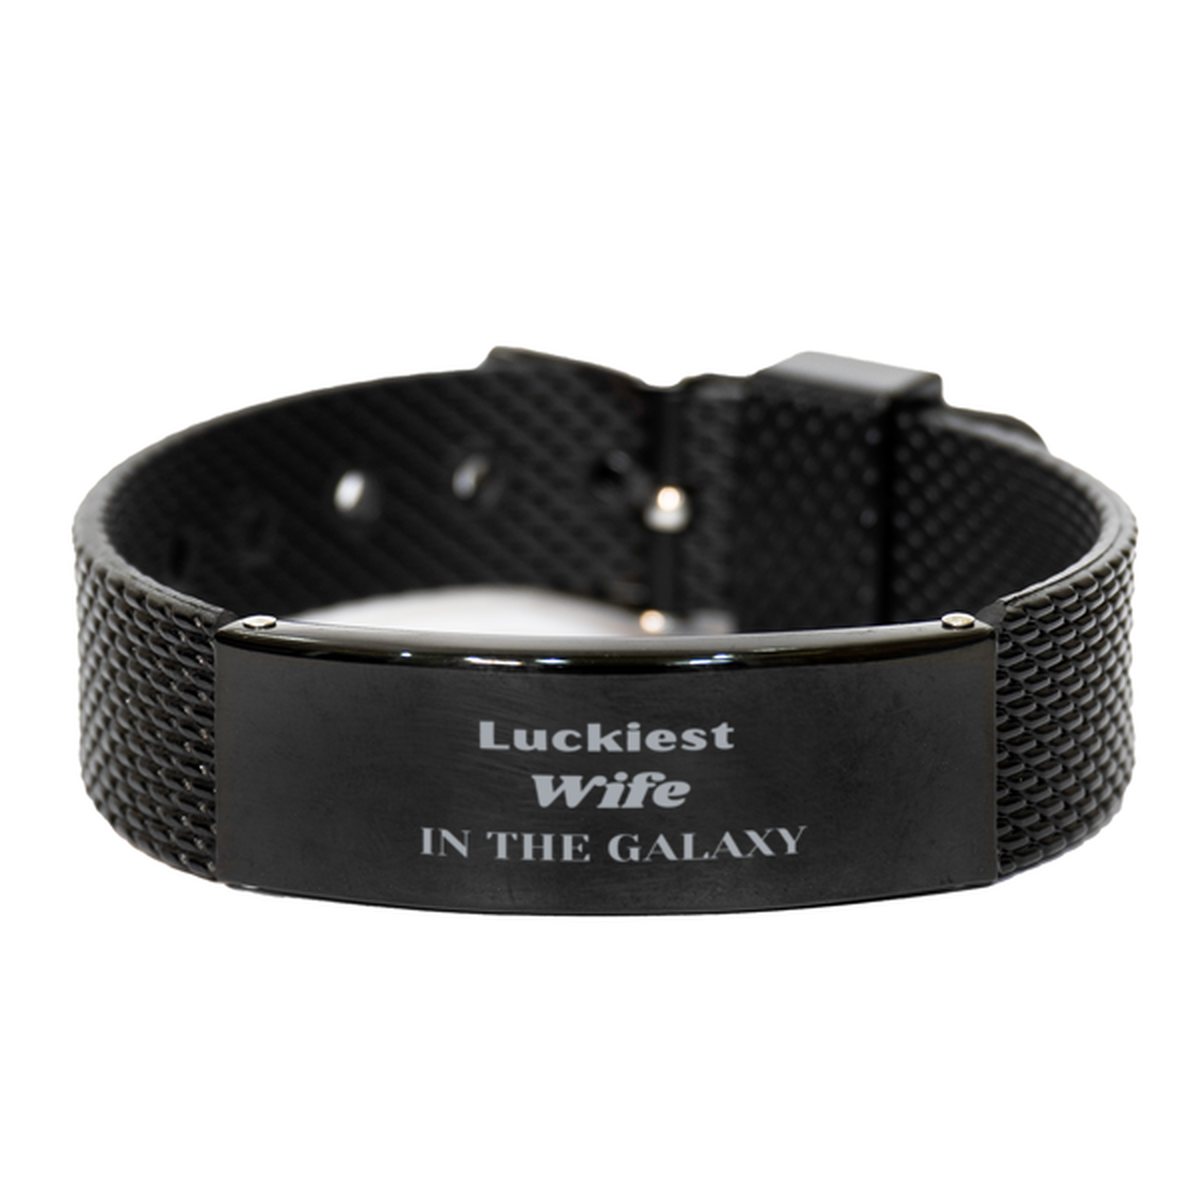 Luckiest Wife in the Galaxy, To My Wife Engraved Gifts, Christmas Wife Black Shark Mesh Bracelet Gifts, X-mas Birthday Unique Gifts For Wife Men Women